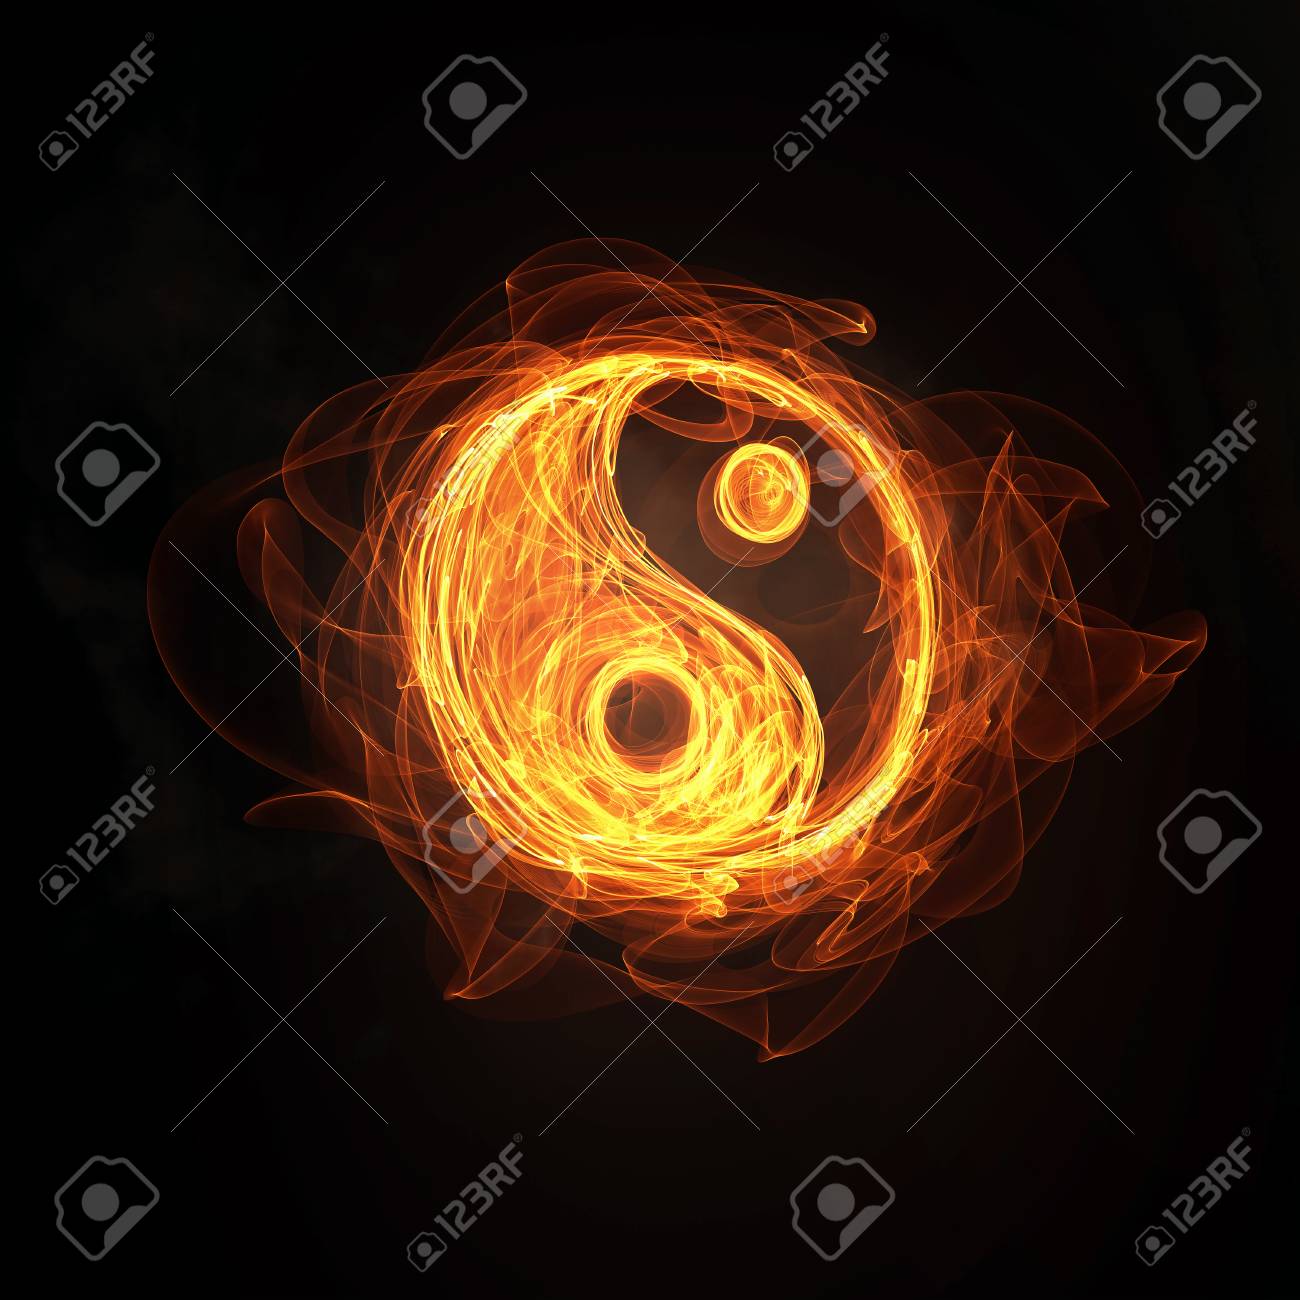 Glowing Light Yin Yang Sign In Fire On Dark Background Stock Photo